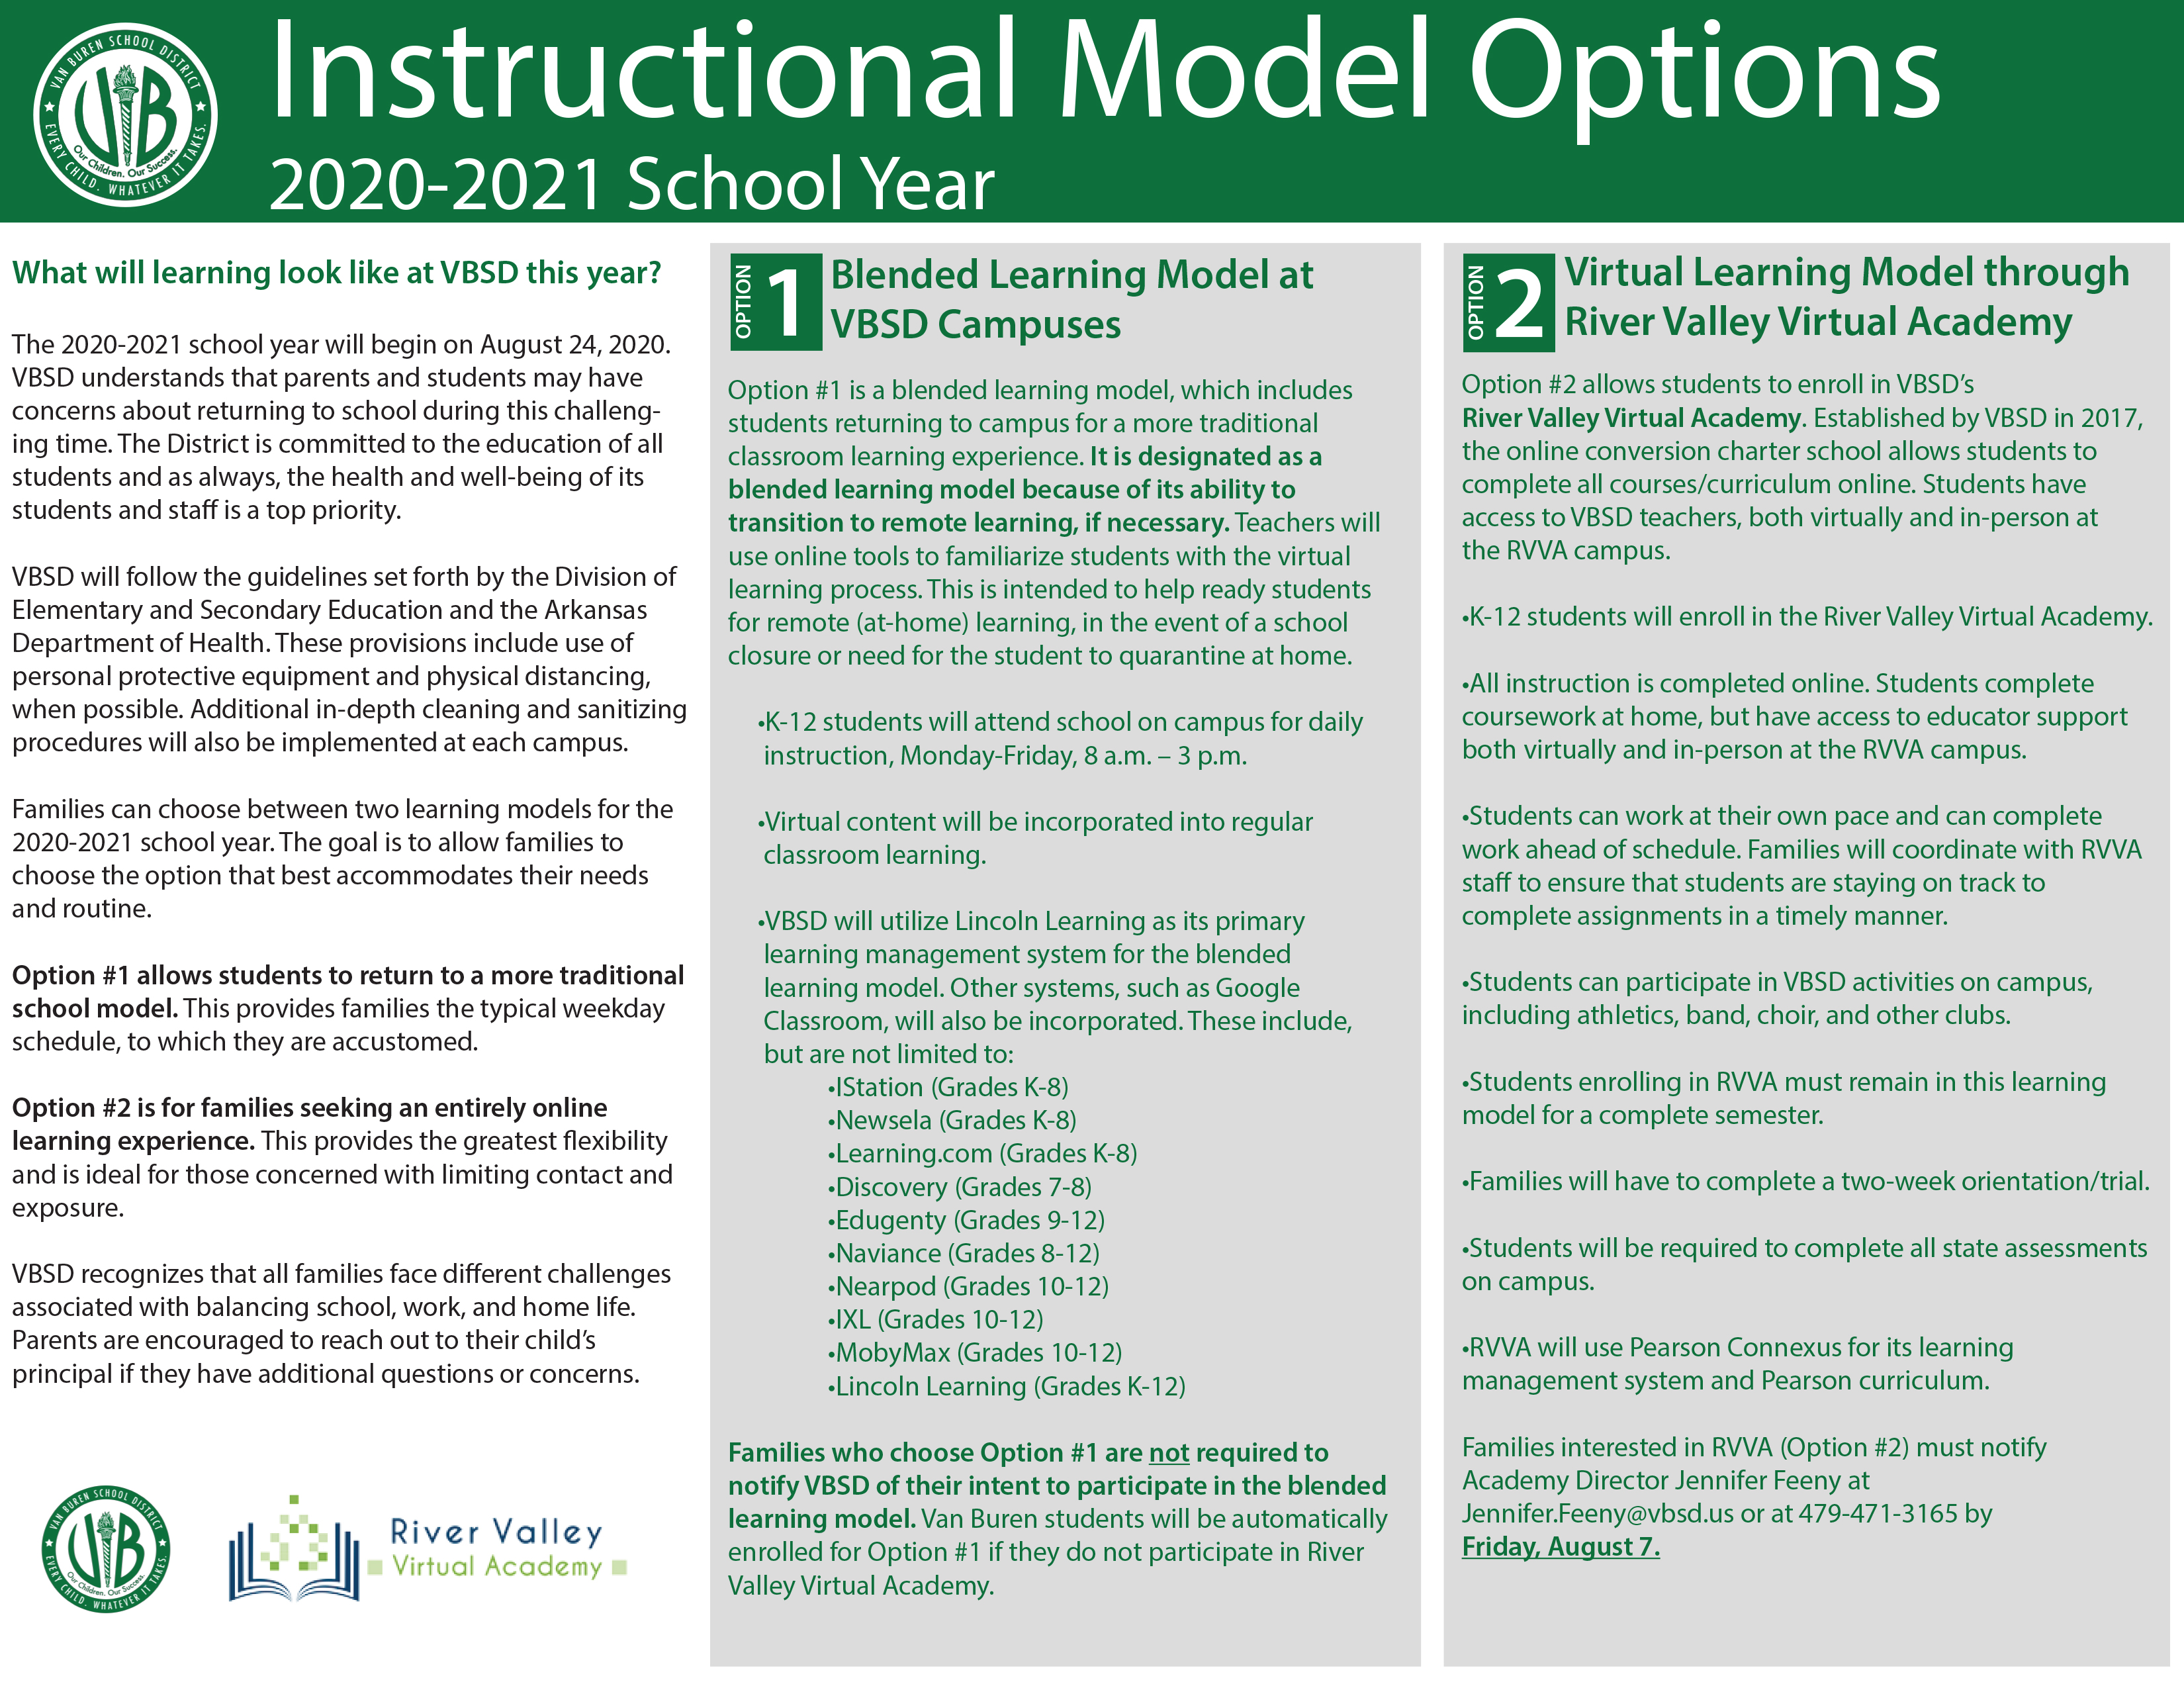 VBSD to offer two instructional options for 2020-2021 School Year